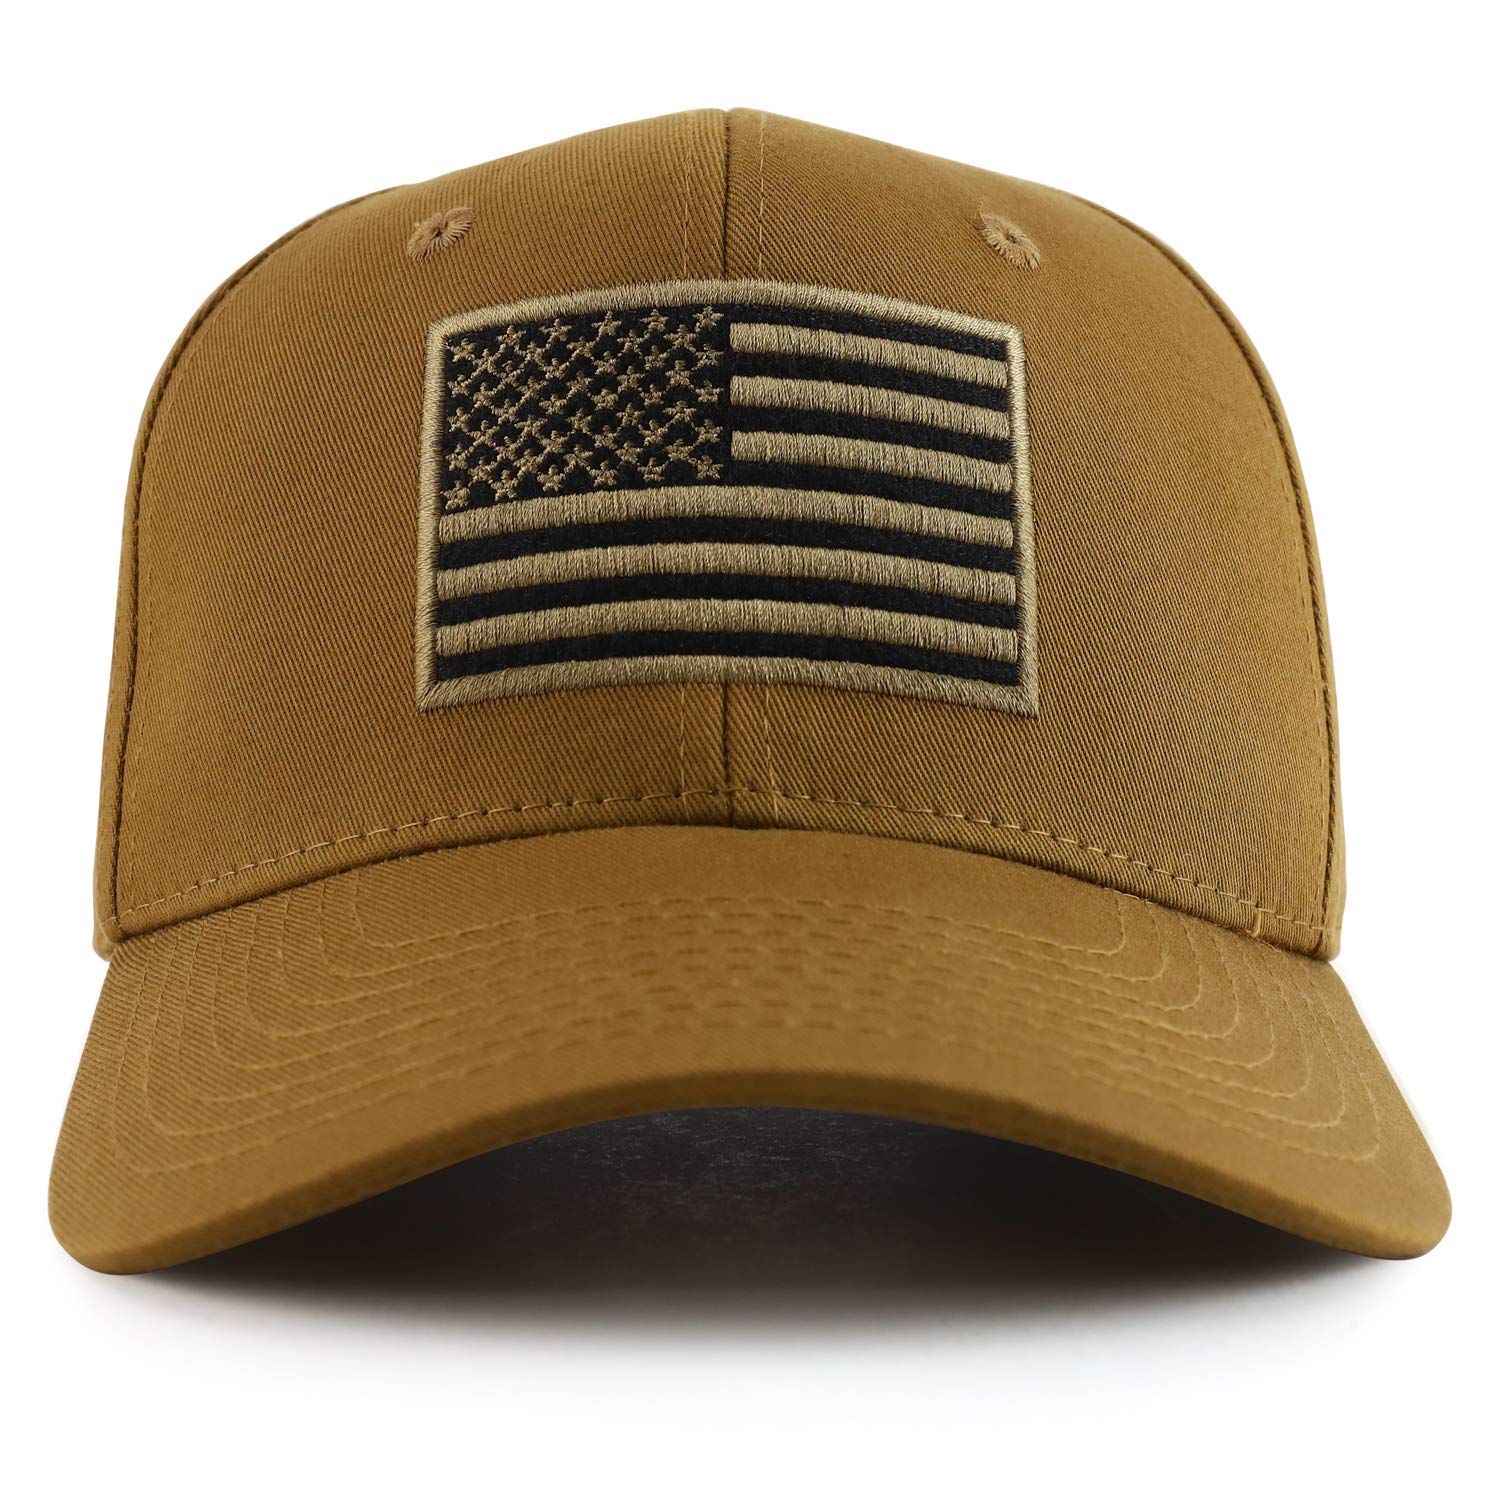 Rapid Dominance USA American Flag Embroidered Operator Cap